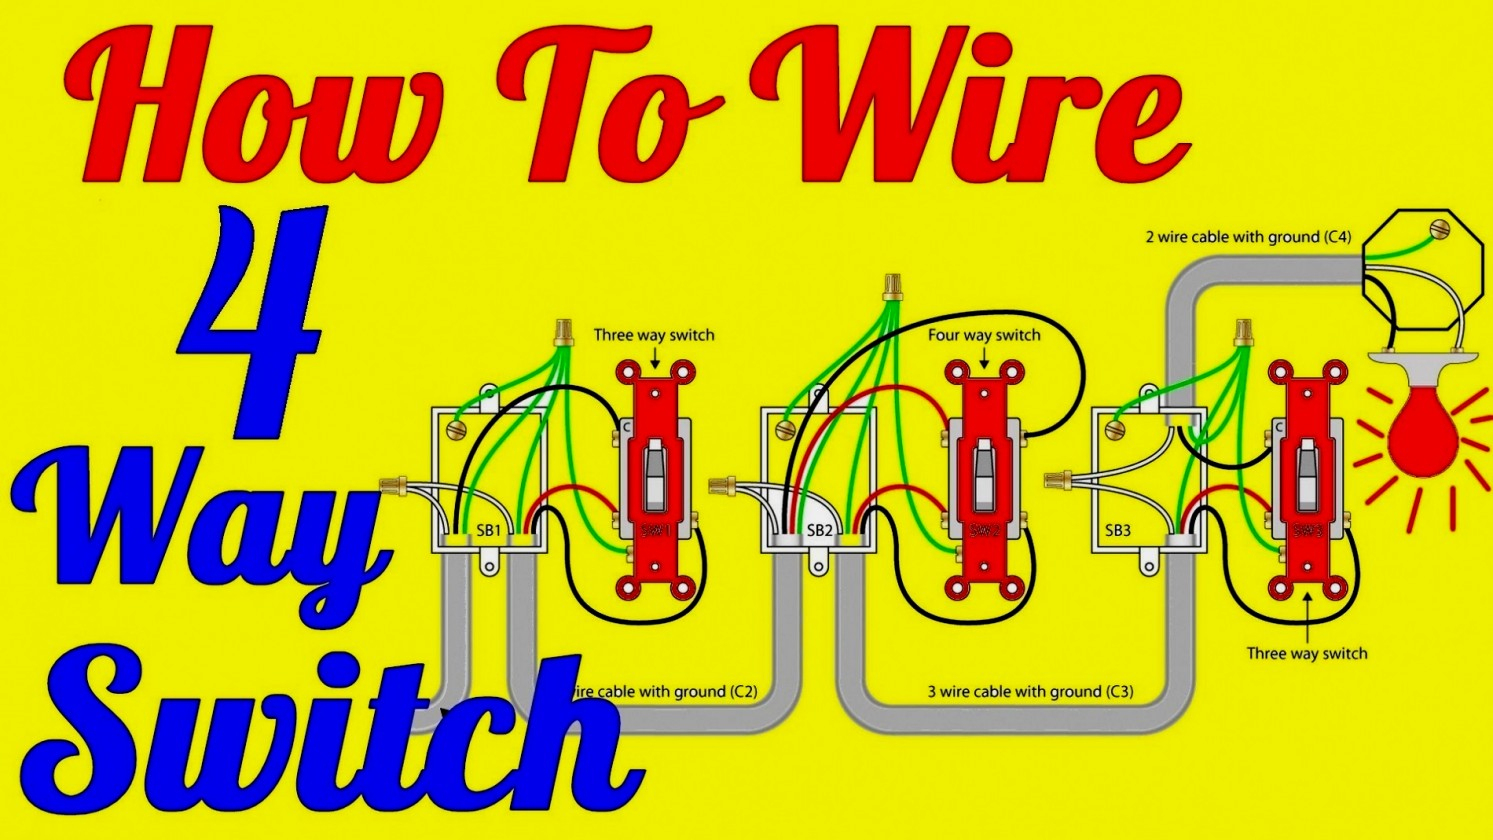 4 Way Wiring Diagram Multiple Lights - All Wiring Diagram - 3 Way Light Switch Wiring Diagram Multiple Lights